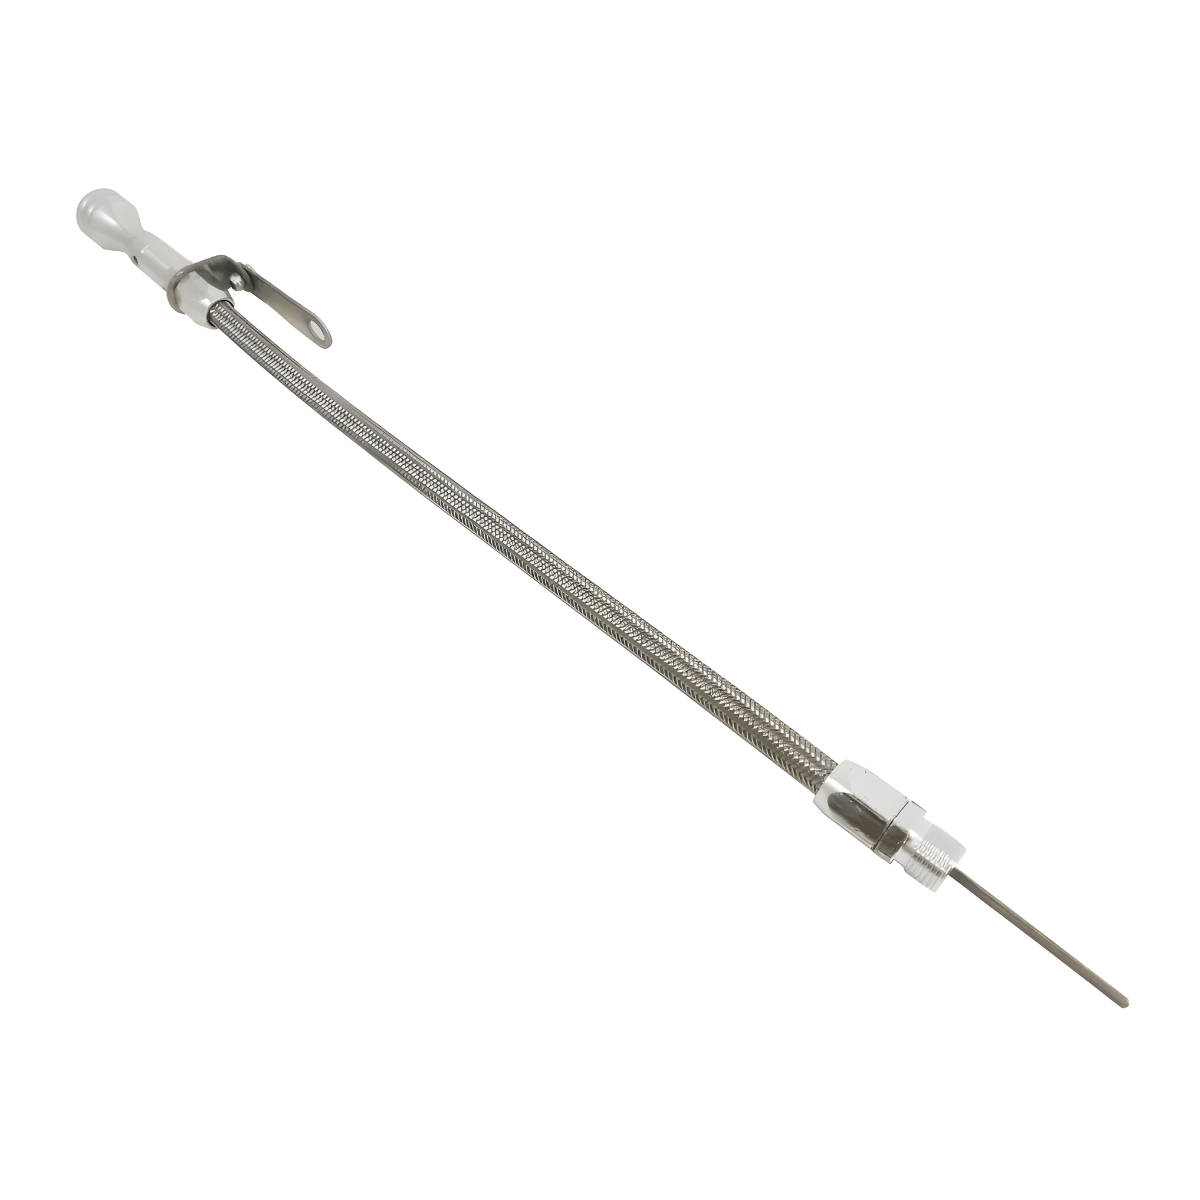 Racing Power Company R5109 FORD FLEXIBLE STAINLESS STEEL OIL DIPSTICK